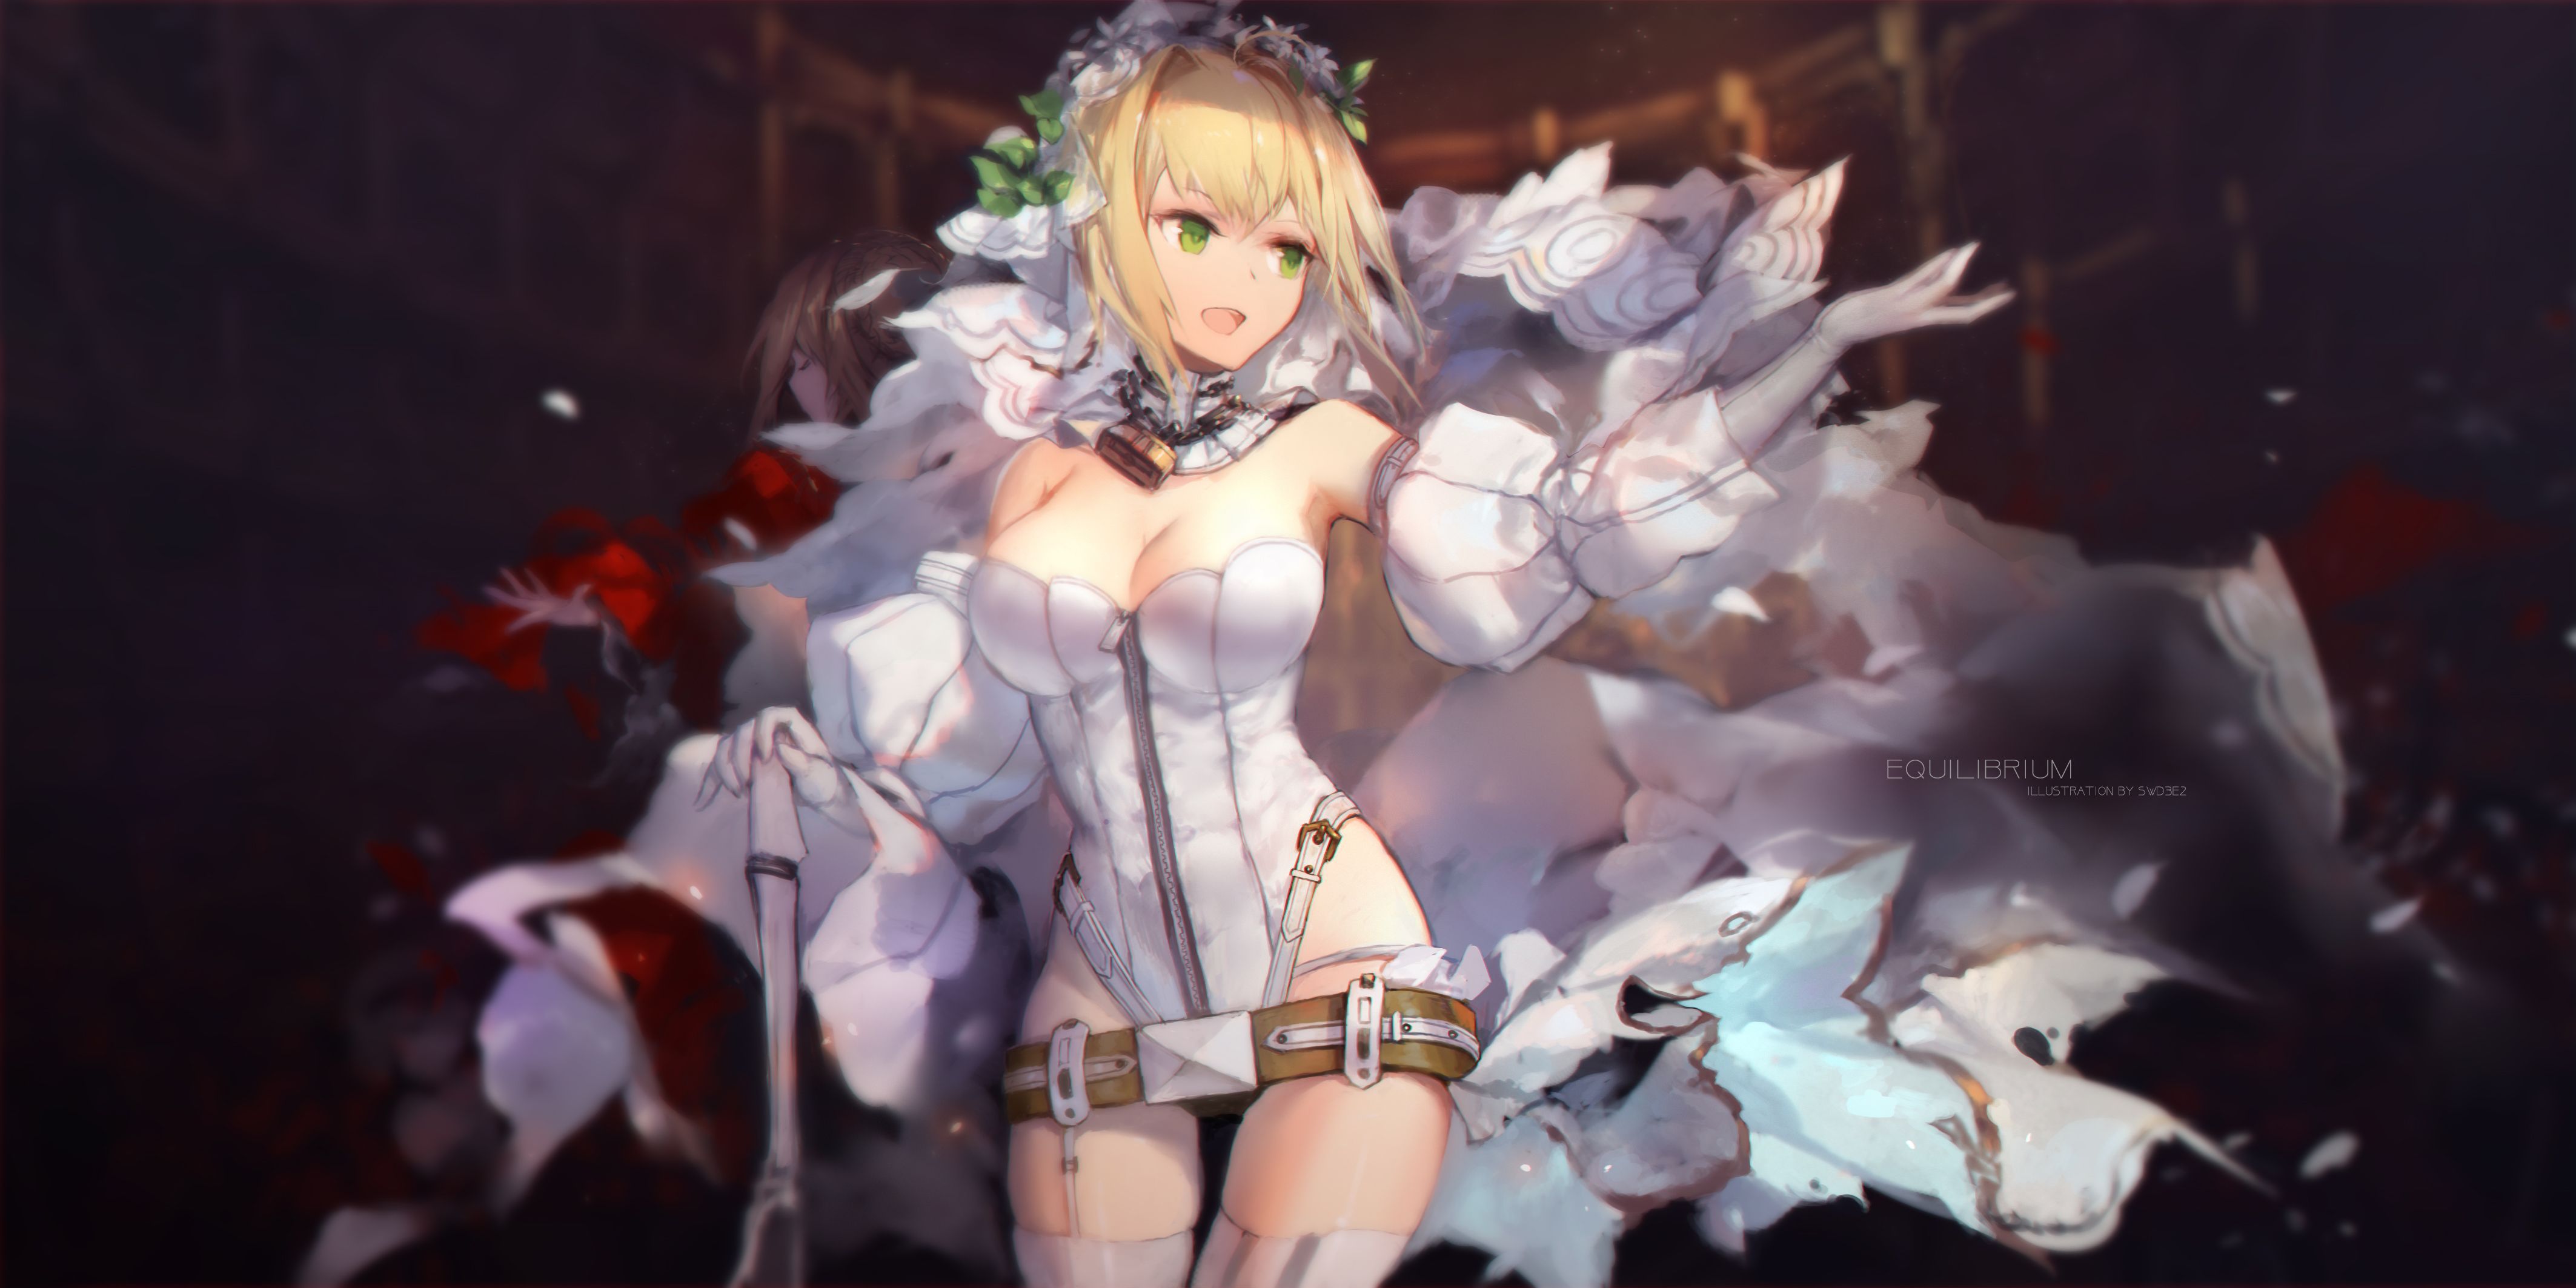 [the second] There are Fate/Grand Order(Fate/EXTRA-CCC), love of Nero Claudius, and gather up an image; No. 01 [20 pieces]! 6